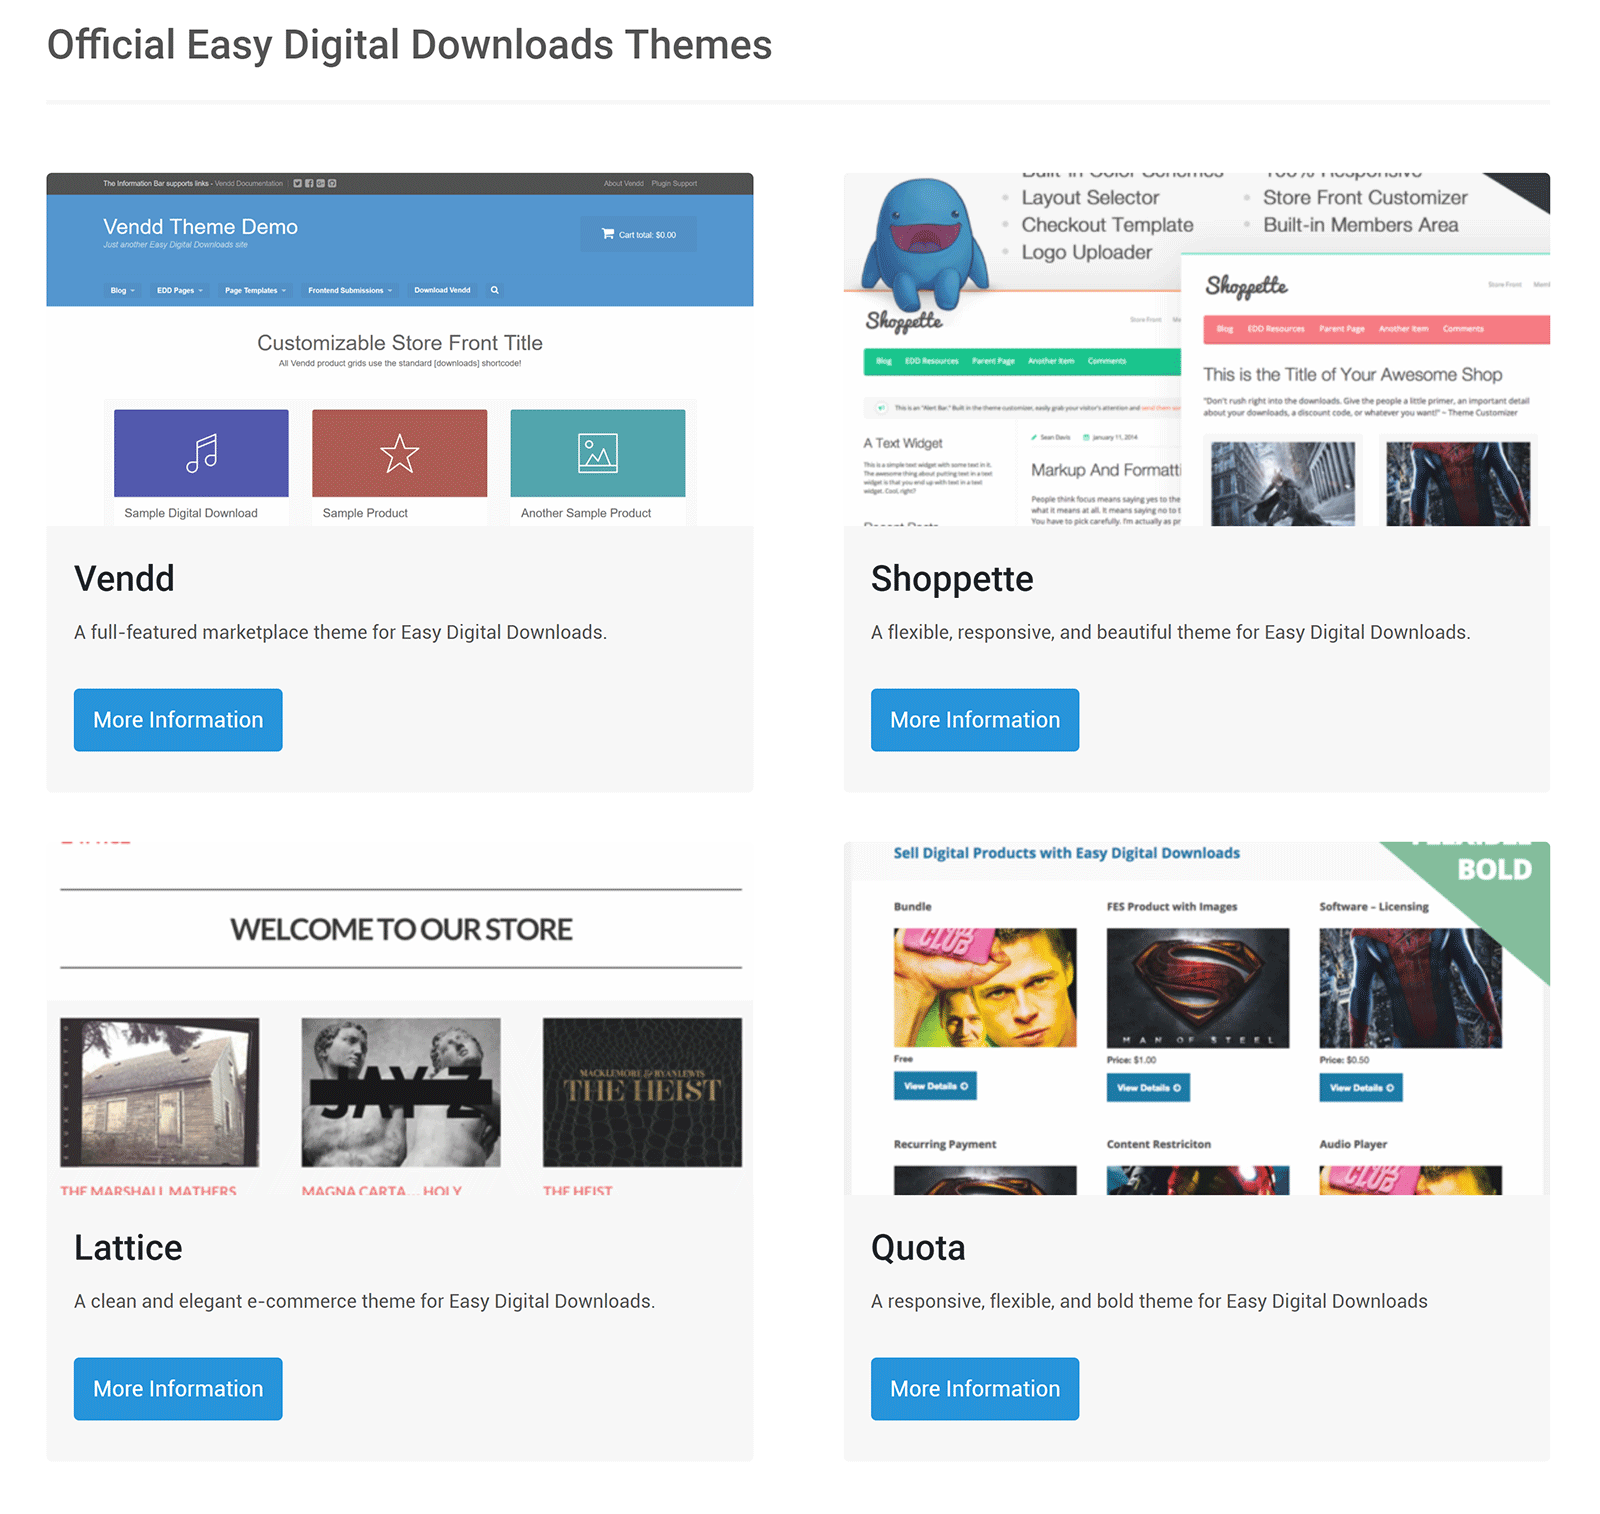 Official Easy Digital Downloads Themes